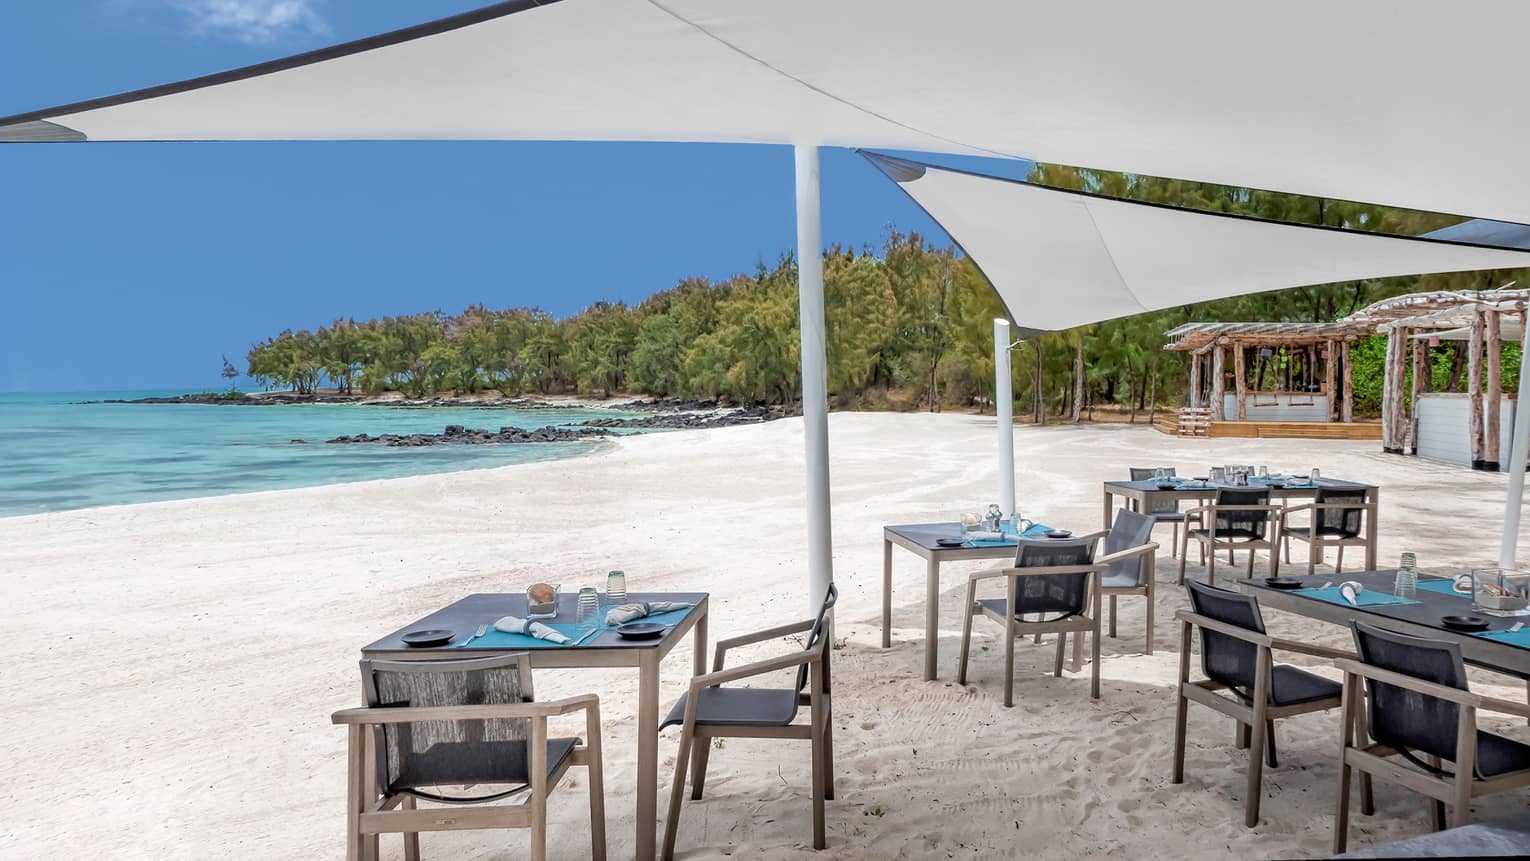 Small dining tables under white umbrella canopies on white sand beach near ocean